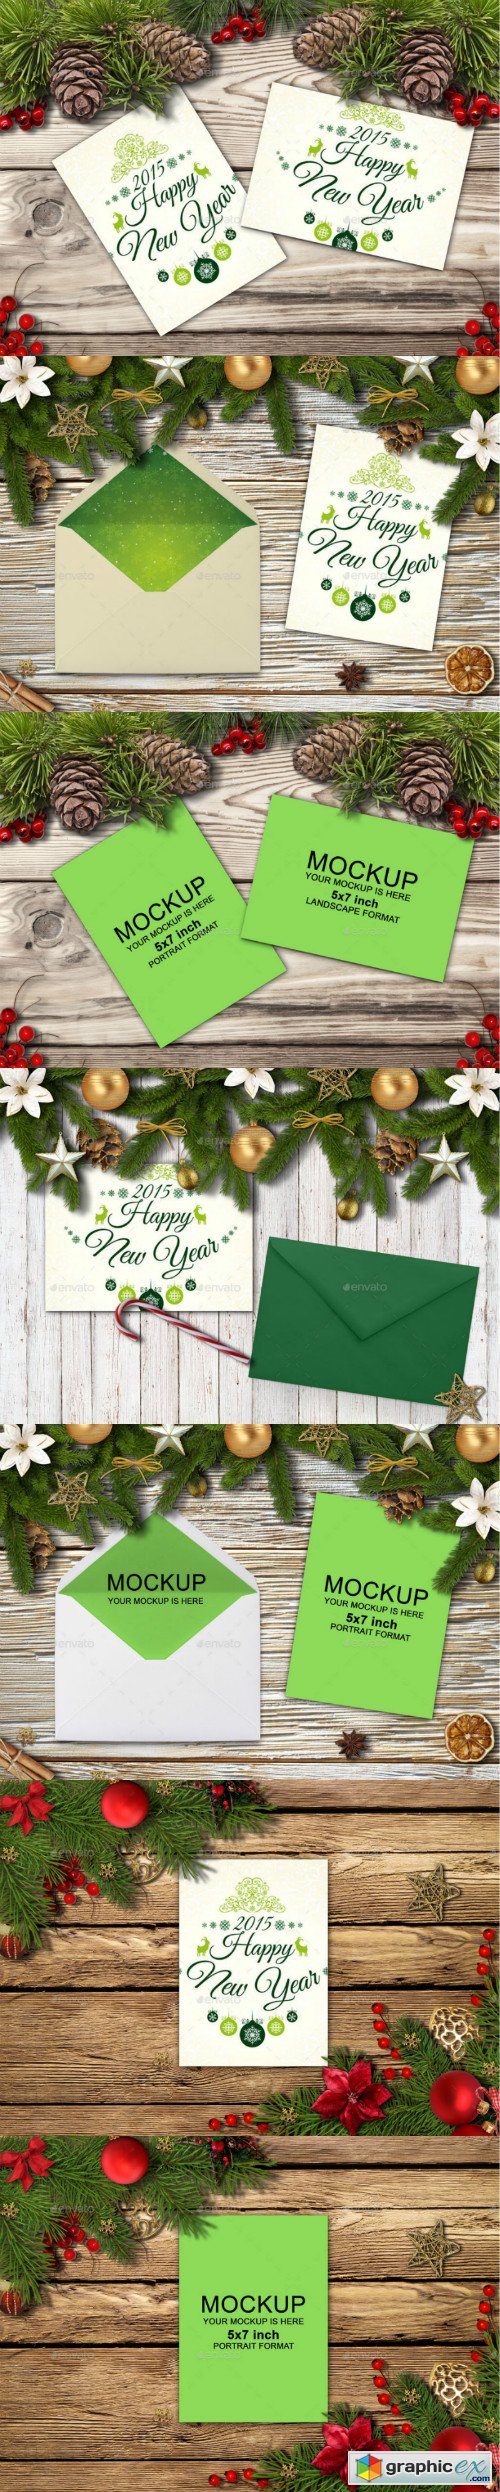 Happy New Year Cards And Invites Mockup Maker